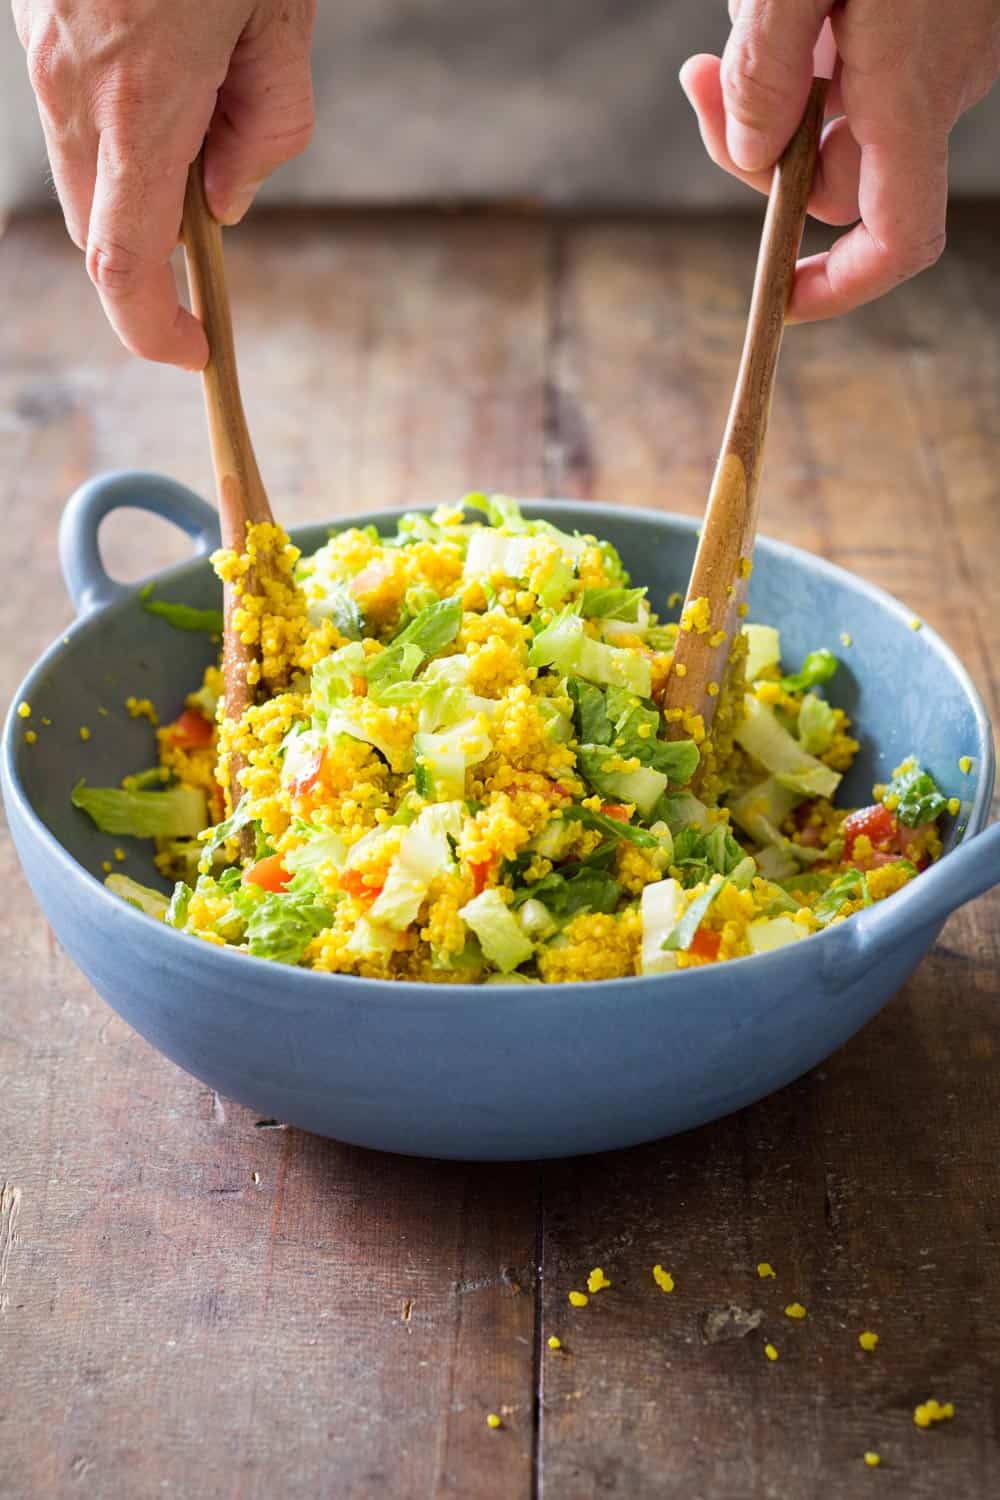 Hands mixing Turmeric Quinoa Salad with a wooden salad fork and spoon.